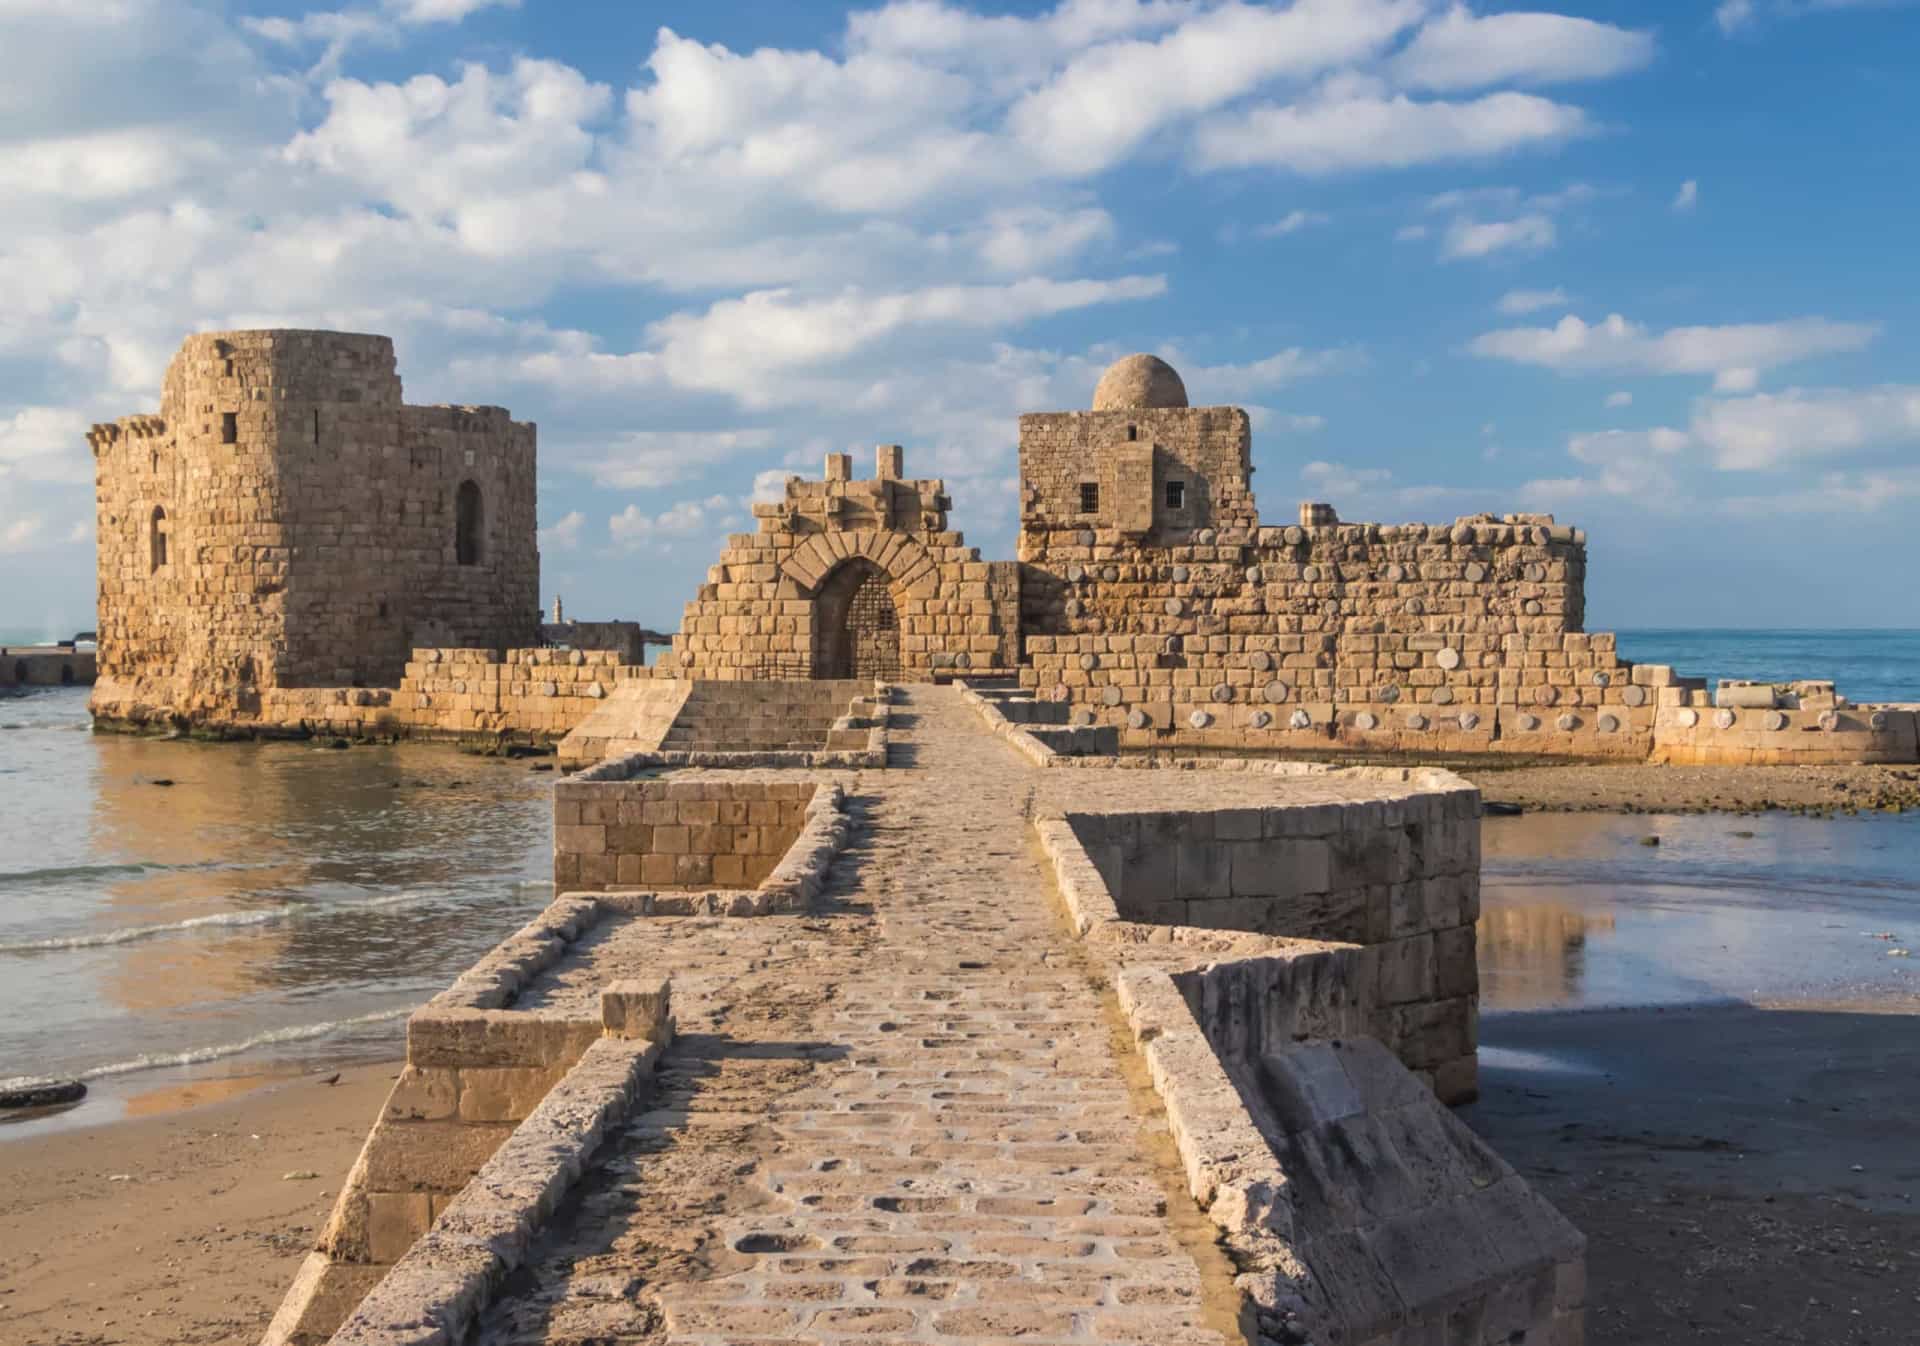 <p>An ancient port city in south Lebanon, Sidon was important in both the Old and New Testaments for its association with the Canaanites. According to the New Testament, Jesus once preached in Sidon (locally known as Saida). Pictured is the crusader sea castle, dating back to 1228 CE.</p>